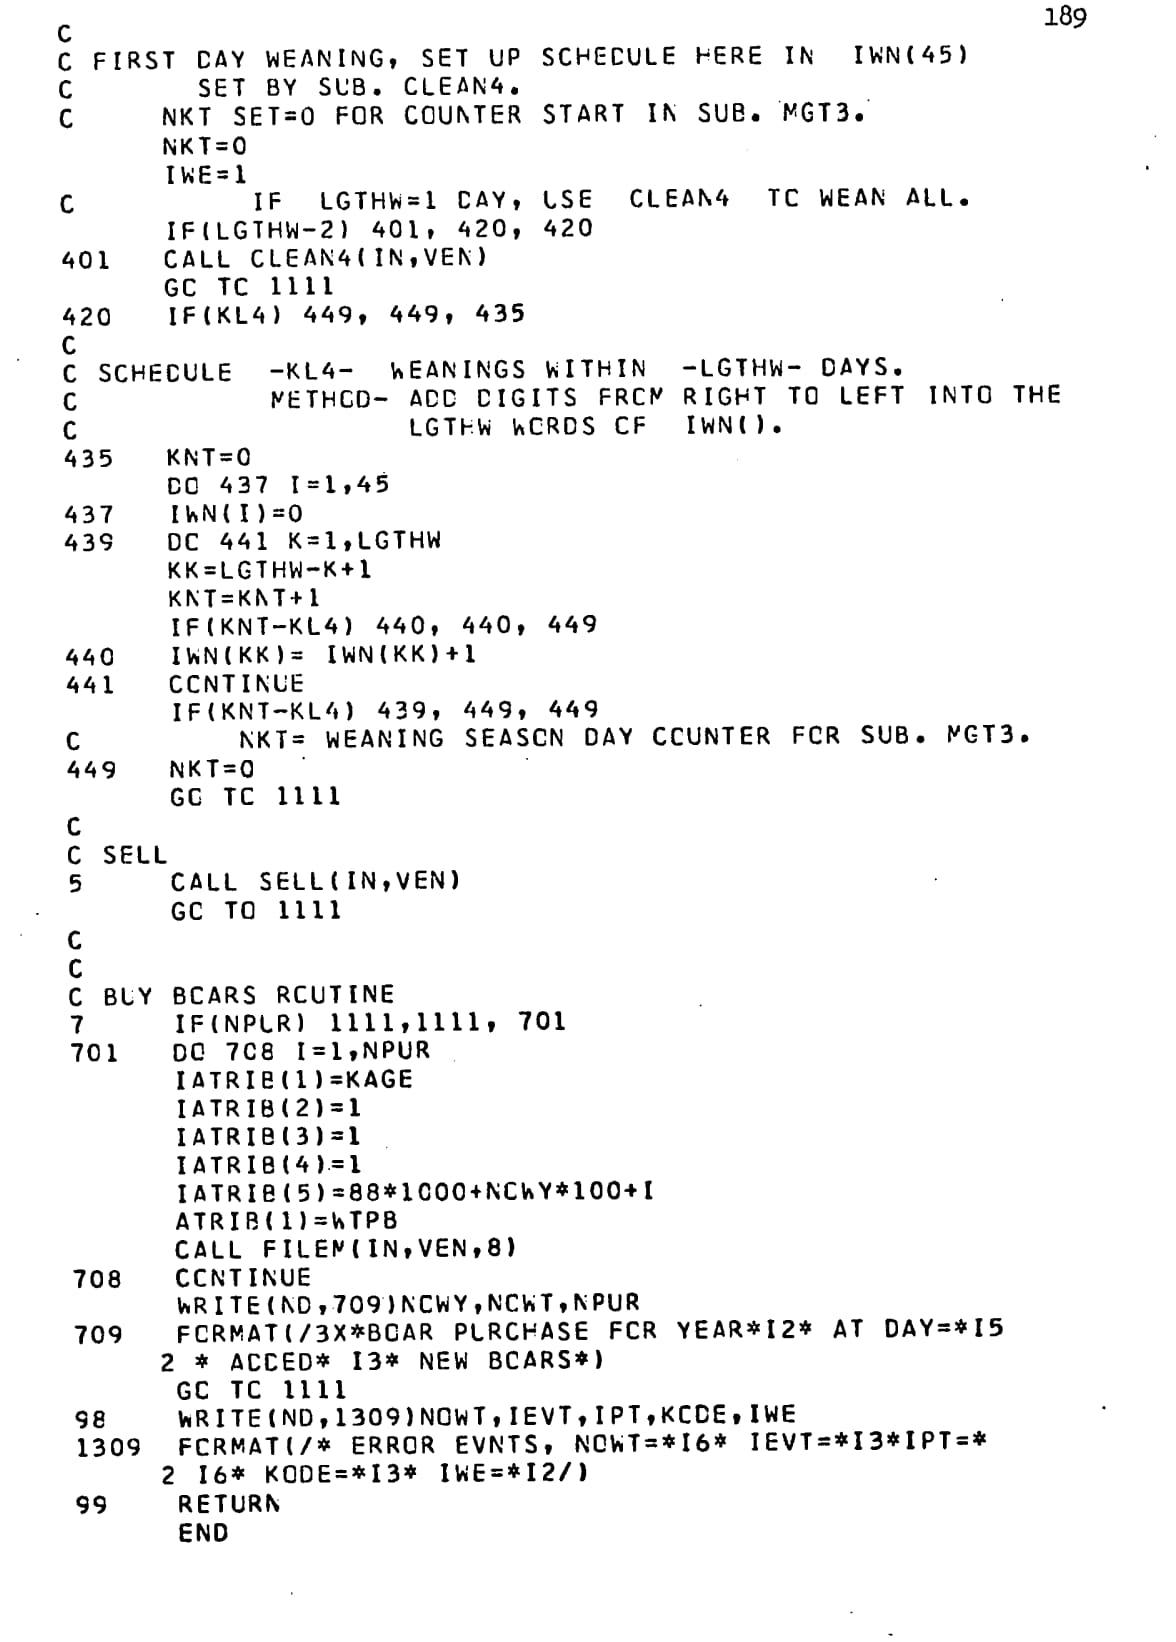 A full page of typewritten FORTRAN code